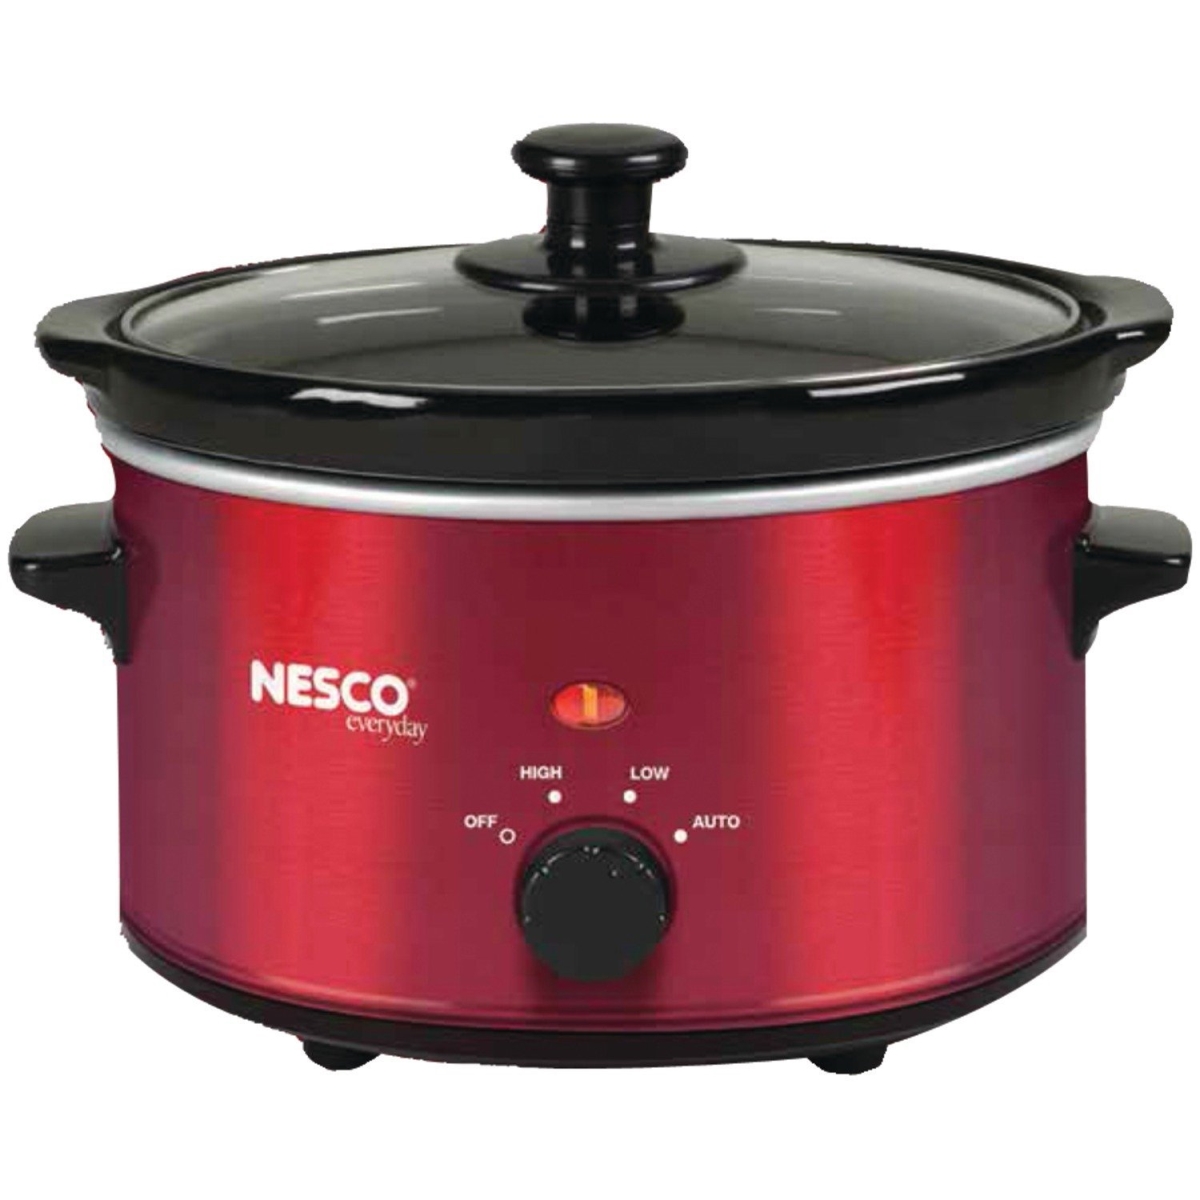 Sc-150r 1.5 Qt. Slow Oval Cooker - Metallic Red, Red